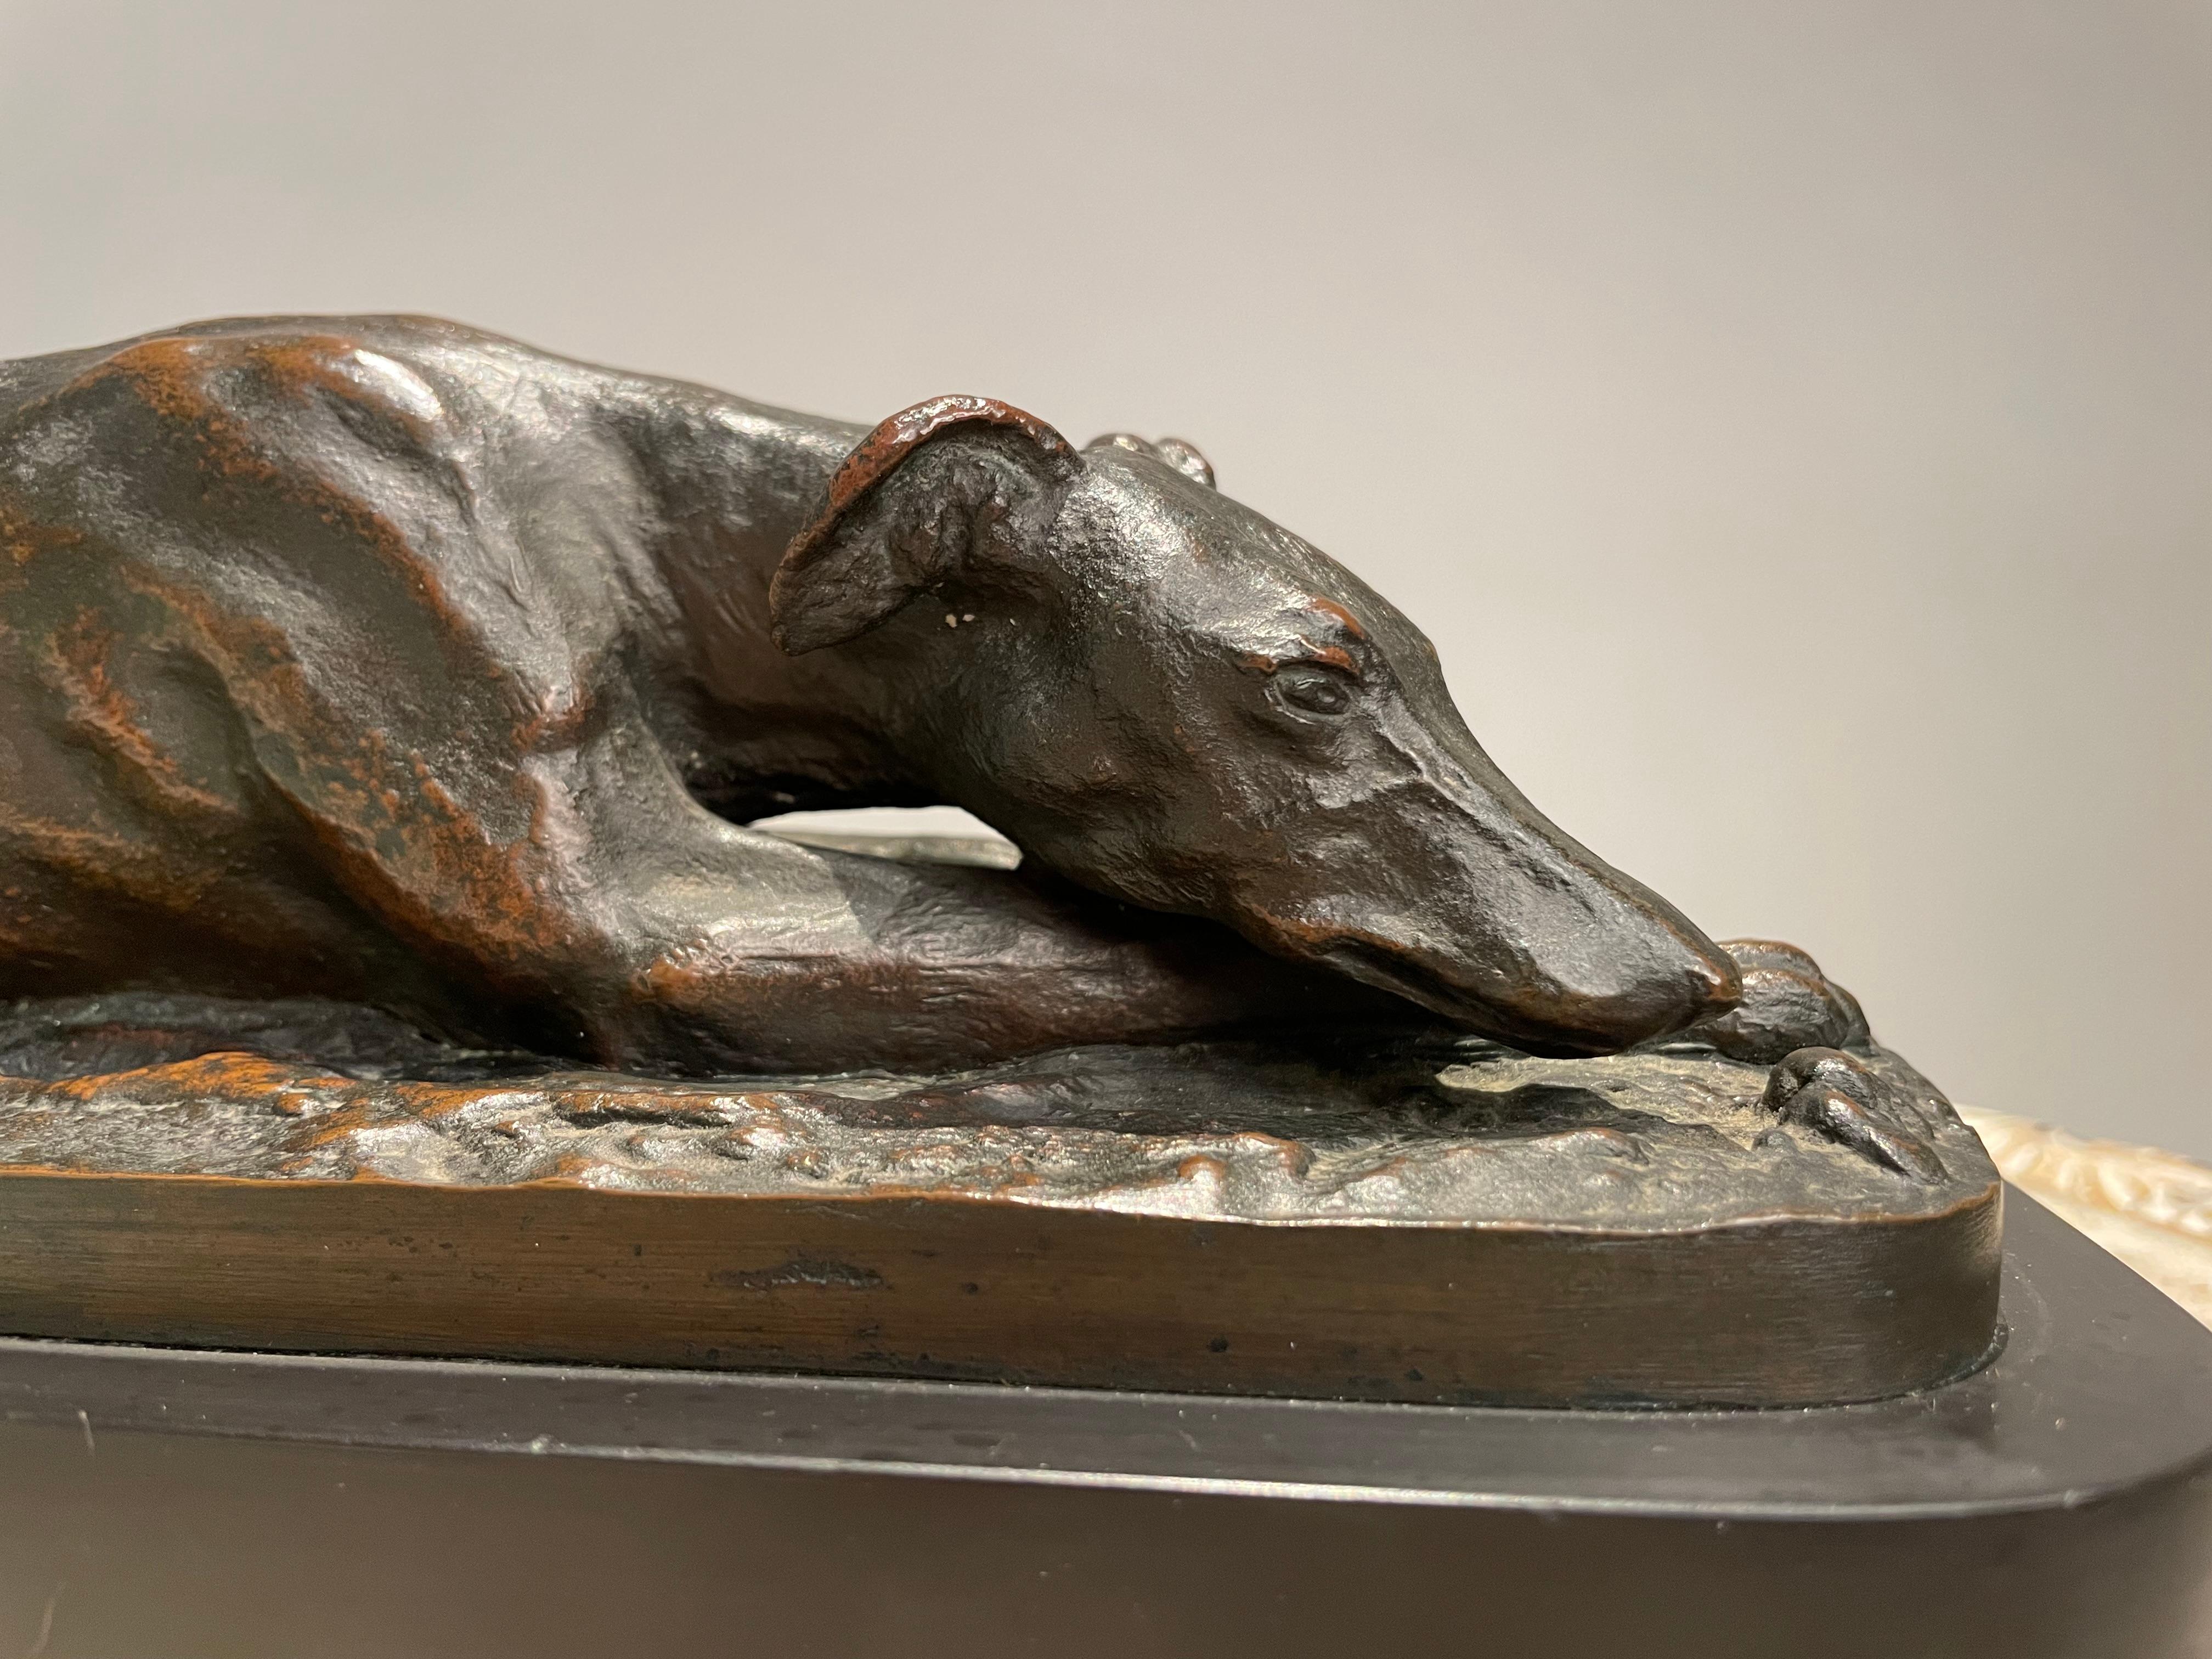 Very sensitive rendering of a greyhound at rest with a rich dark brown patina with lighter highlights showing through. The dog is shown reclining with one paw turned up, a detail I find endearing as a dog owner, my border collie does this too!